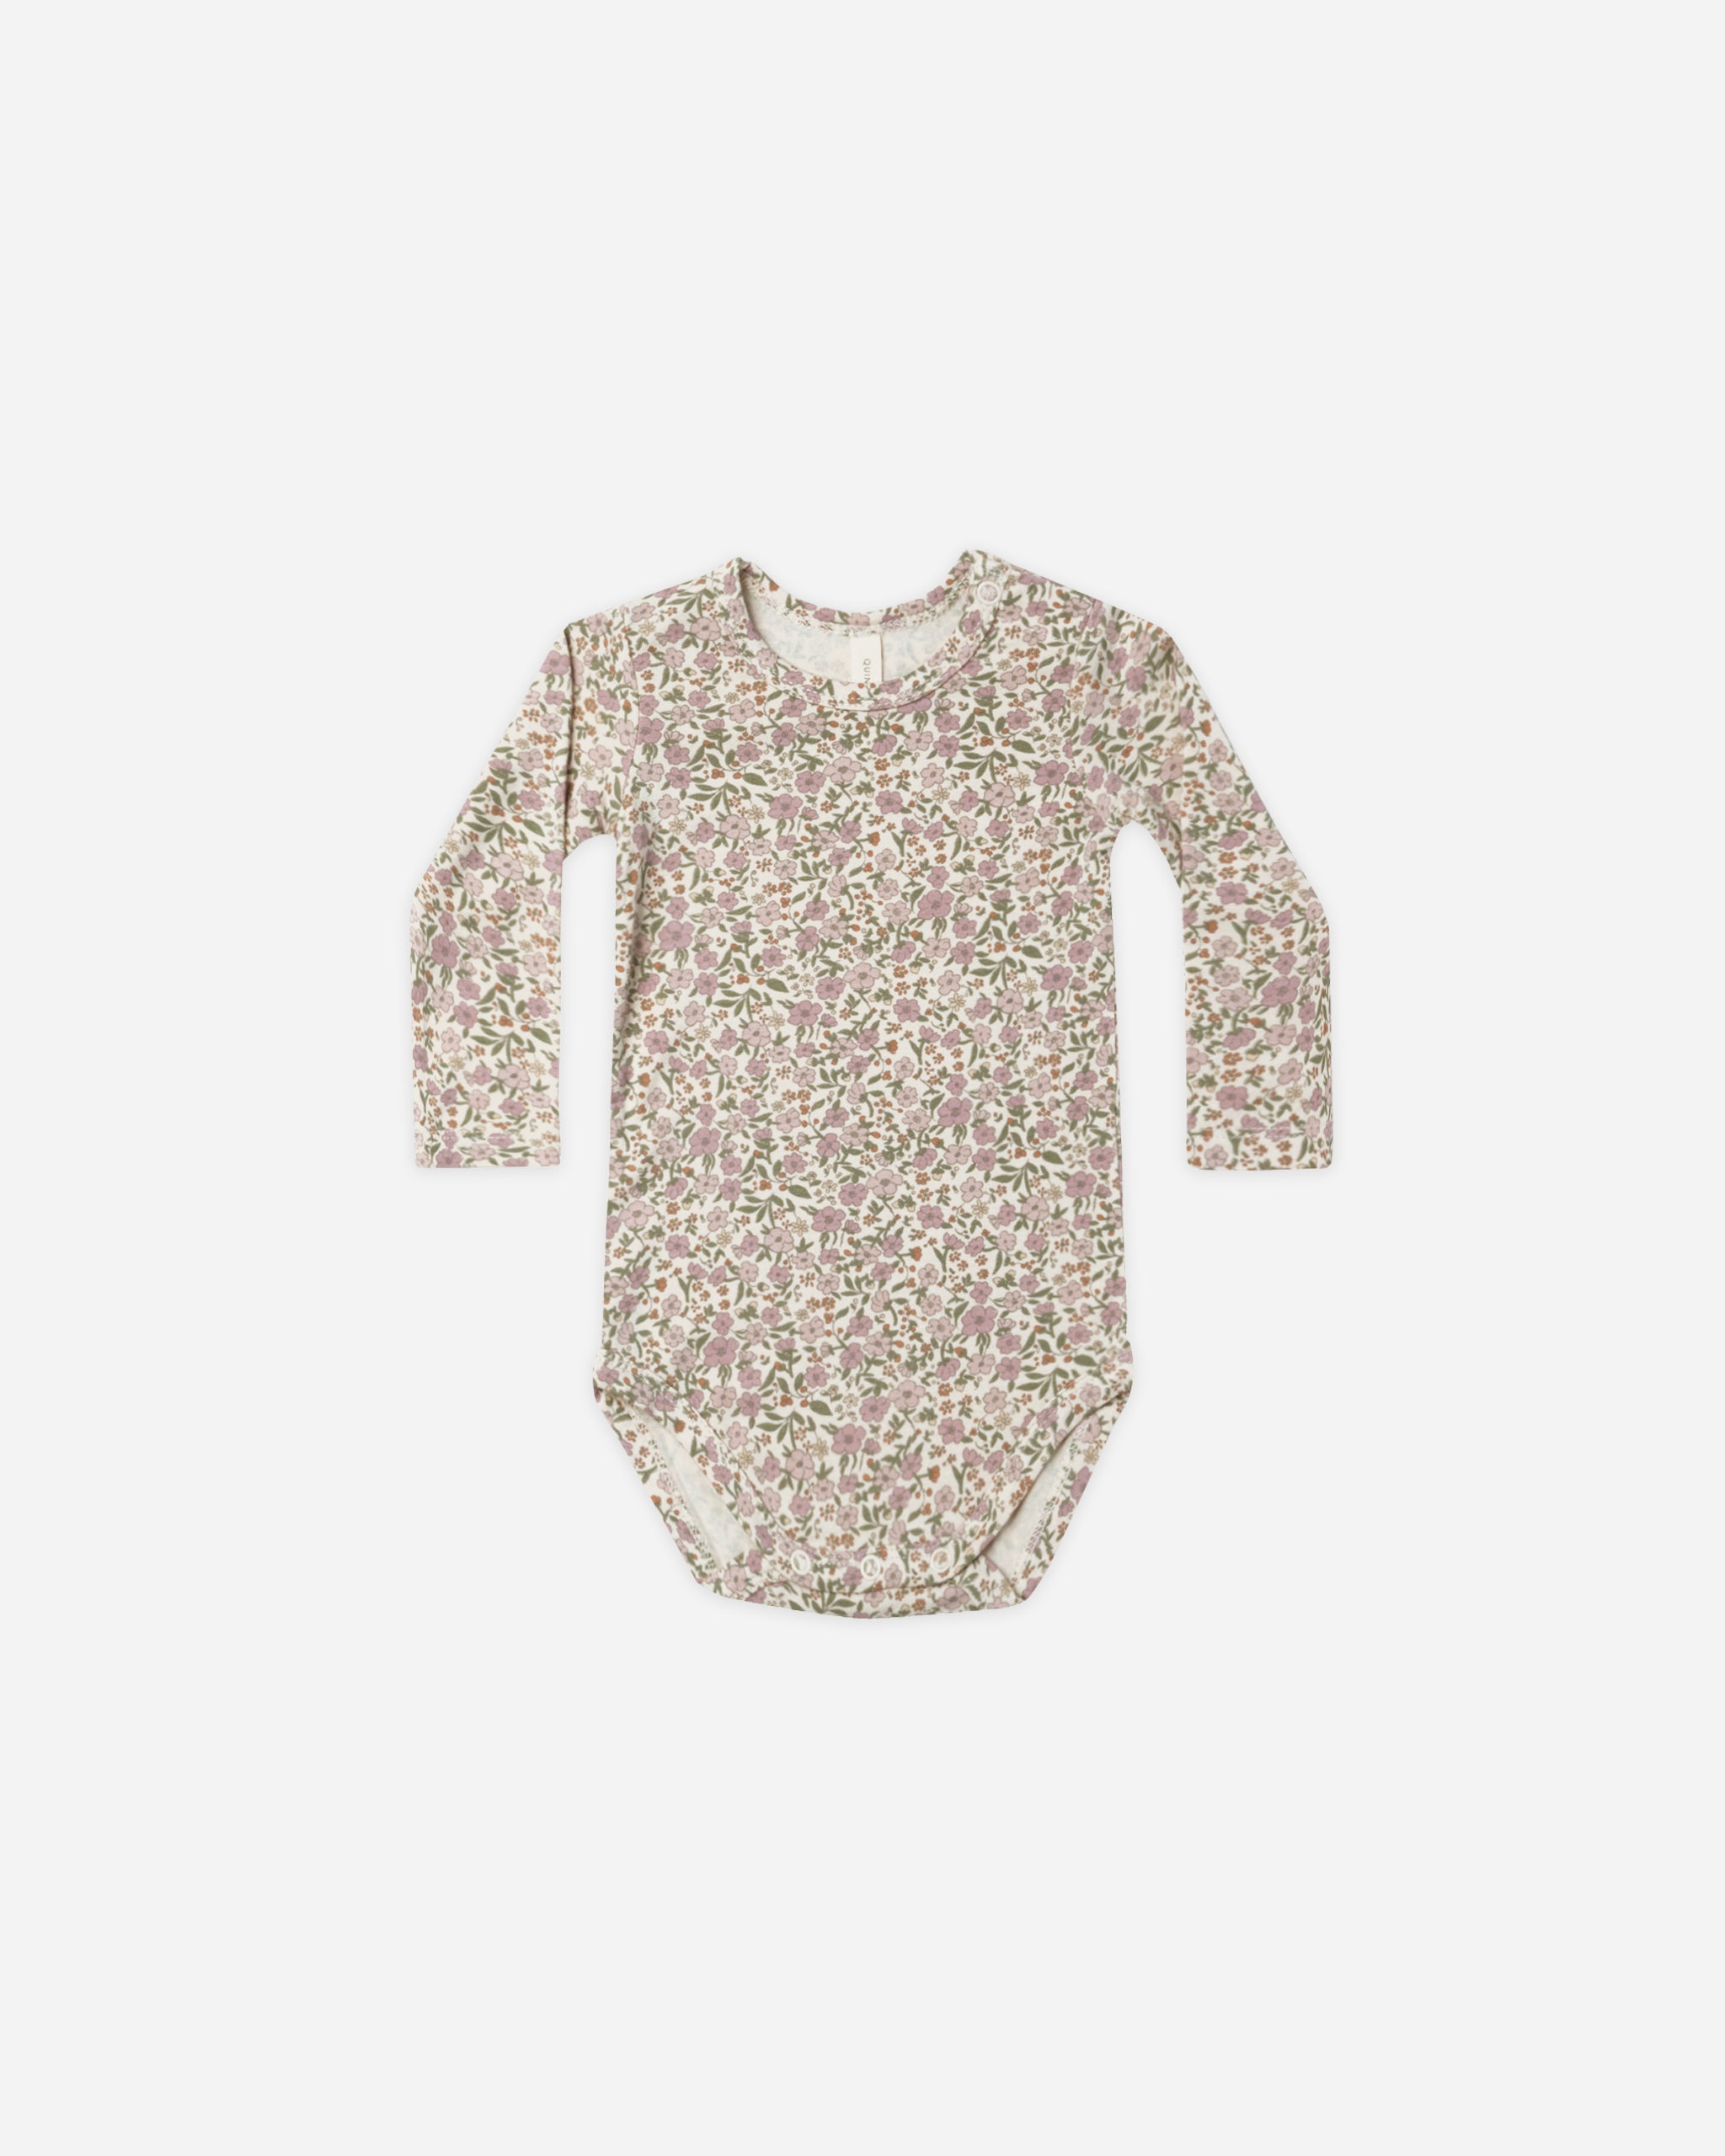 Bamboo Long Sleeve Bodysuit || Flower Field - Rylee + Cru | Kids Clothes | Trendy Baby Clothes | Modern Infant Outfits |